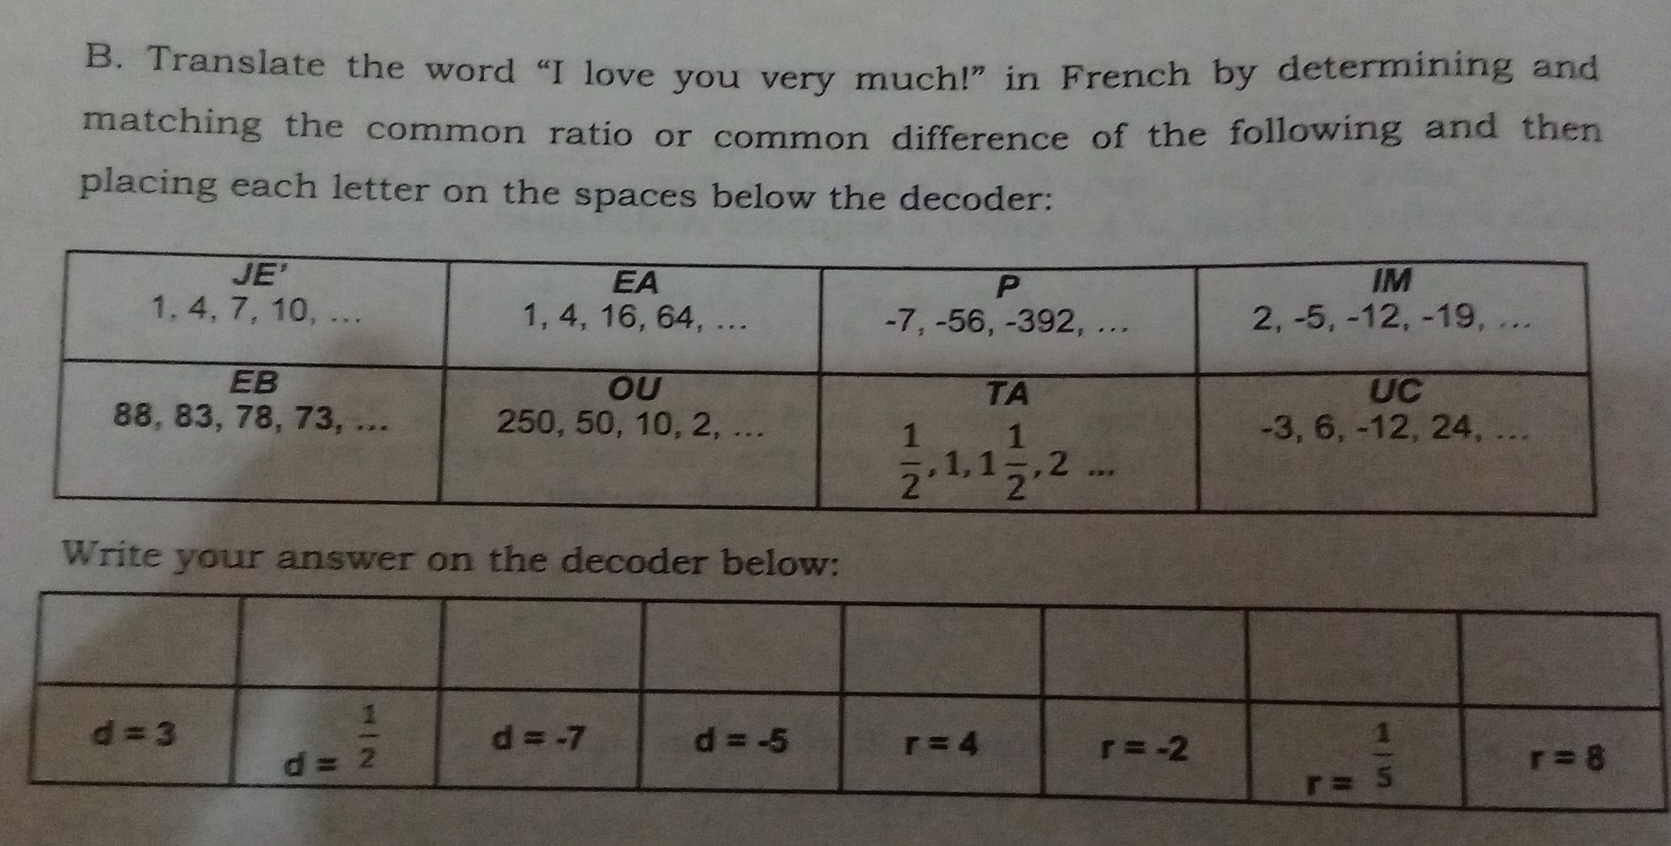 B. Translate the word “I love you very much!” in French by determining and matching the common ratio or common difference of the following and then placing each letter on the spaces below the decoder: Write your answer on the decoder below: d=3 d= 1/2 d=-7 d=-5 r=4 r=-2 r= 1/5 r=8